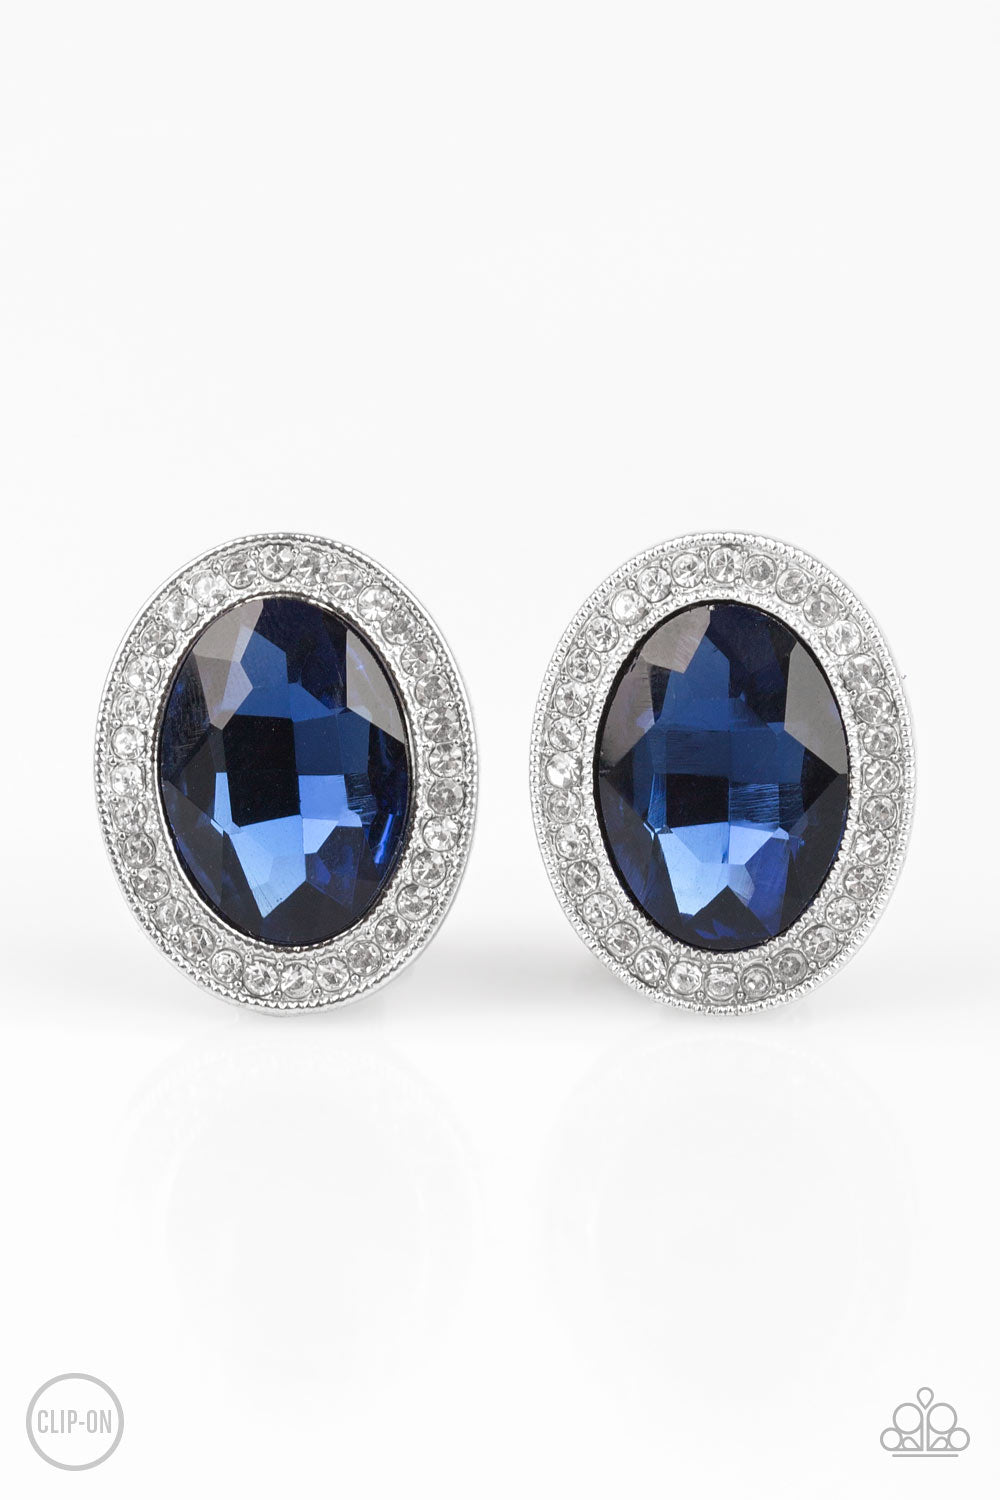 Only FAME In Town - Blue Item #E460 An oversized blue gem is pressed into the center of a silver frame radiating with glassy white rhinestones for a glamorous look. Earring attaches to a standard clip-on fitting. All Paparazzi Accessories are lead free and nickel free!  Sold as one pair of clip-on earrings.